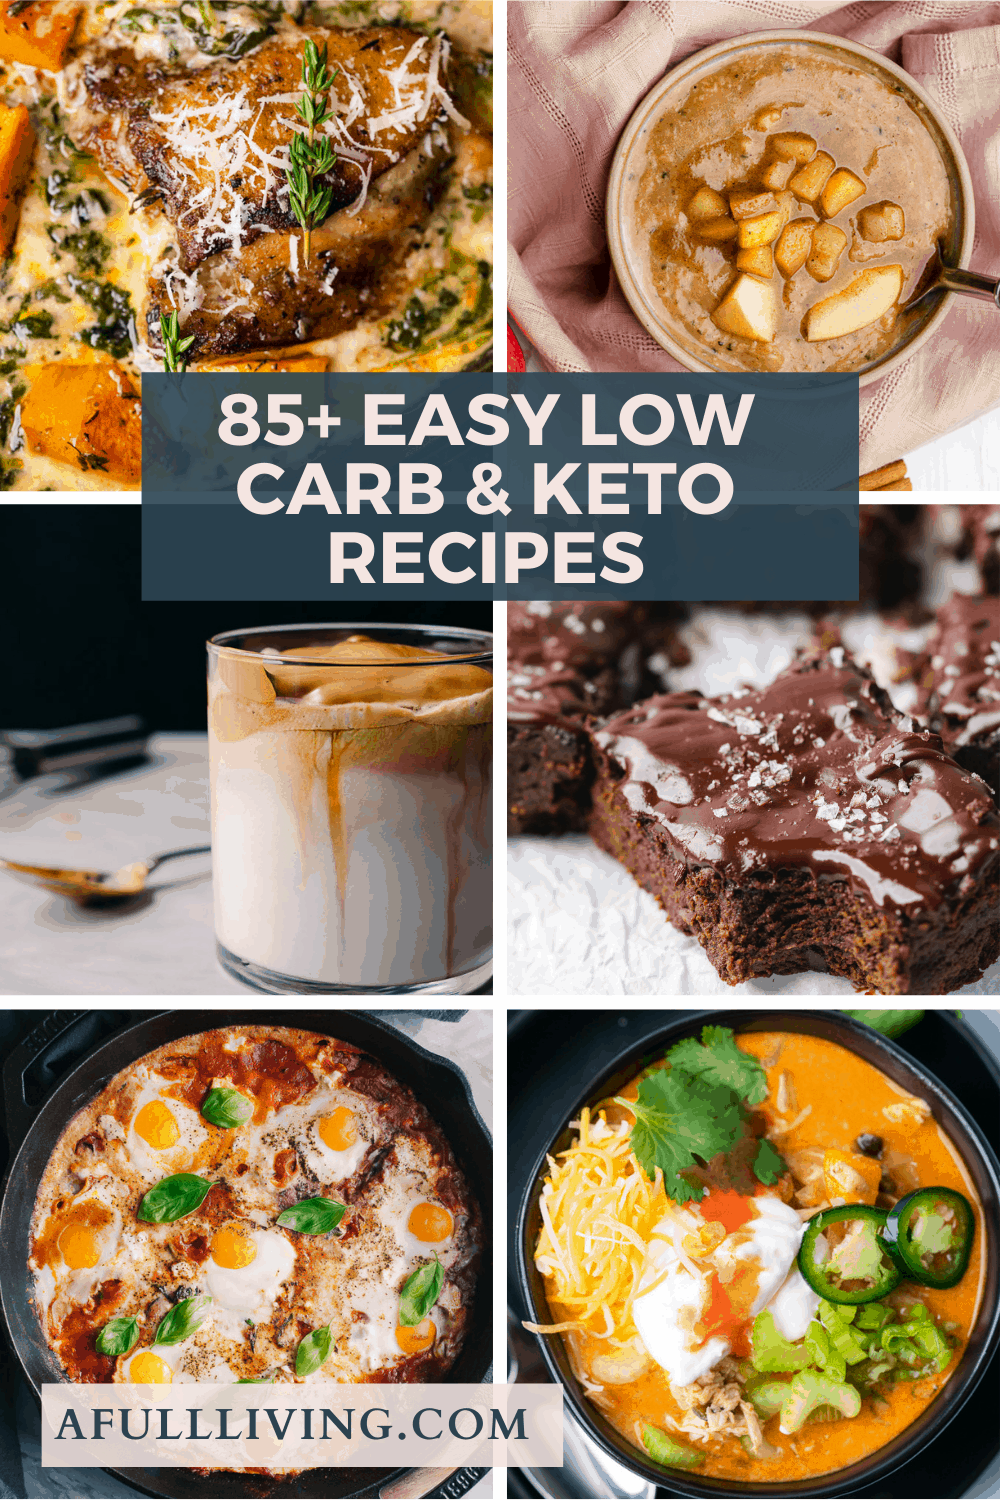 85+ Easy Low Carb and Keto Recipes graphic with text 